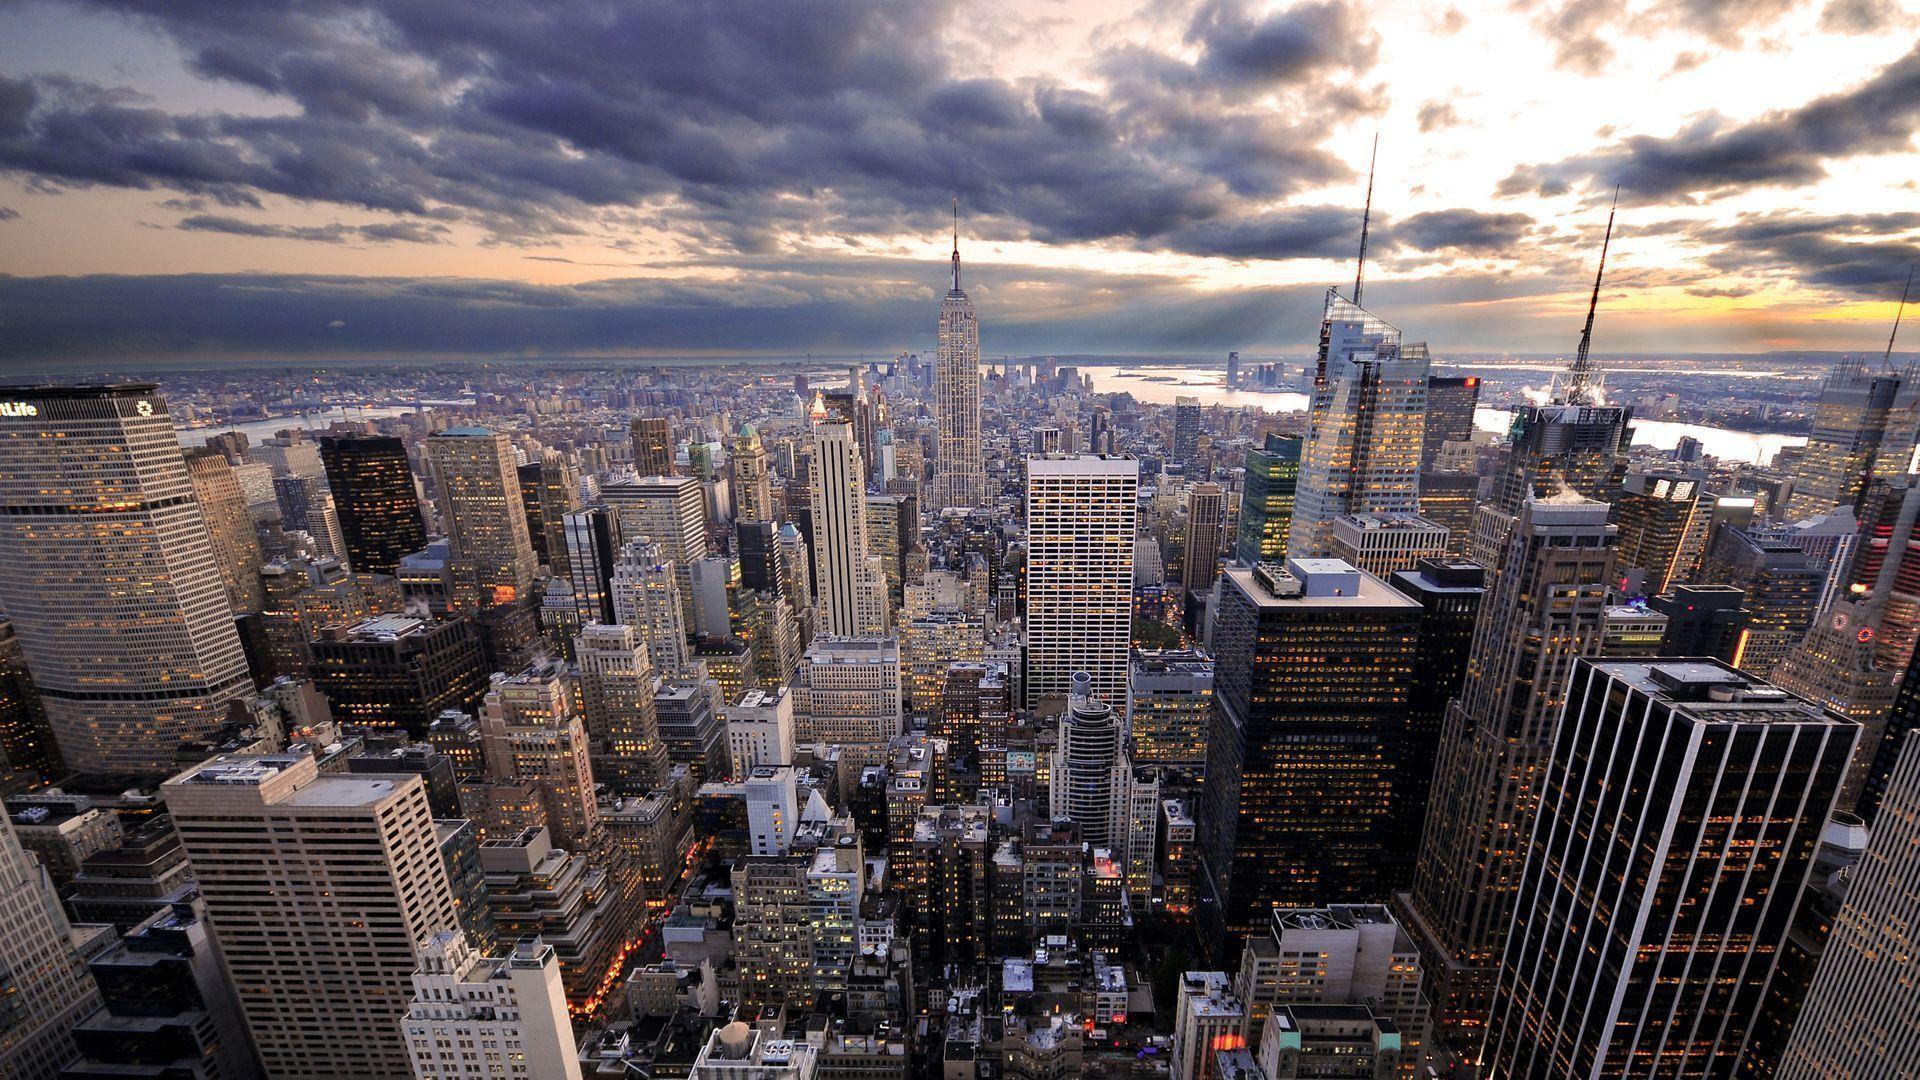 Image For > New York Wallpapers Hd 1080p